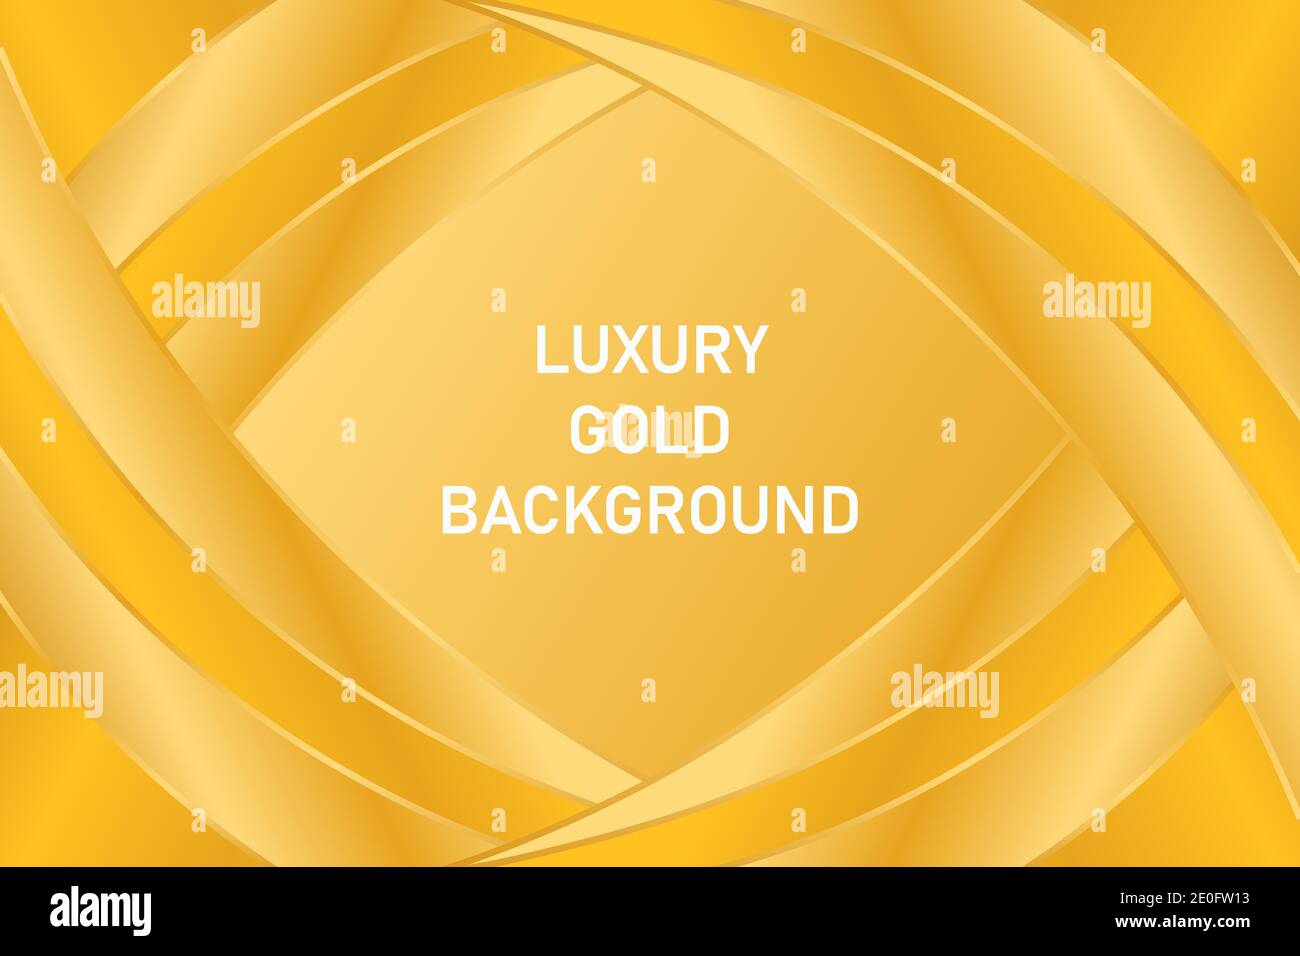 Gold luxury background, Abstract gold background with luxury style Stock Vector